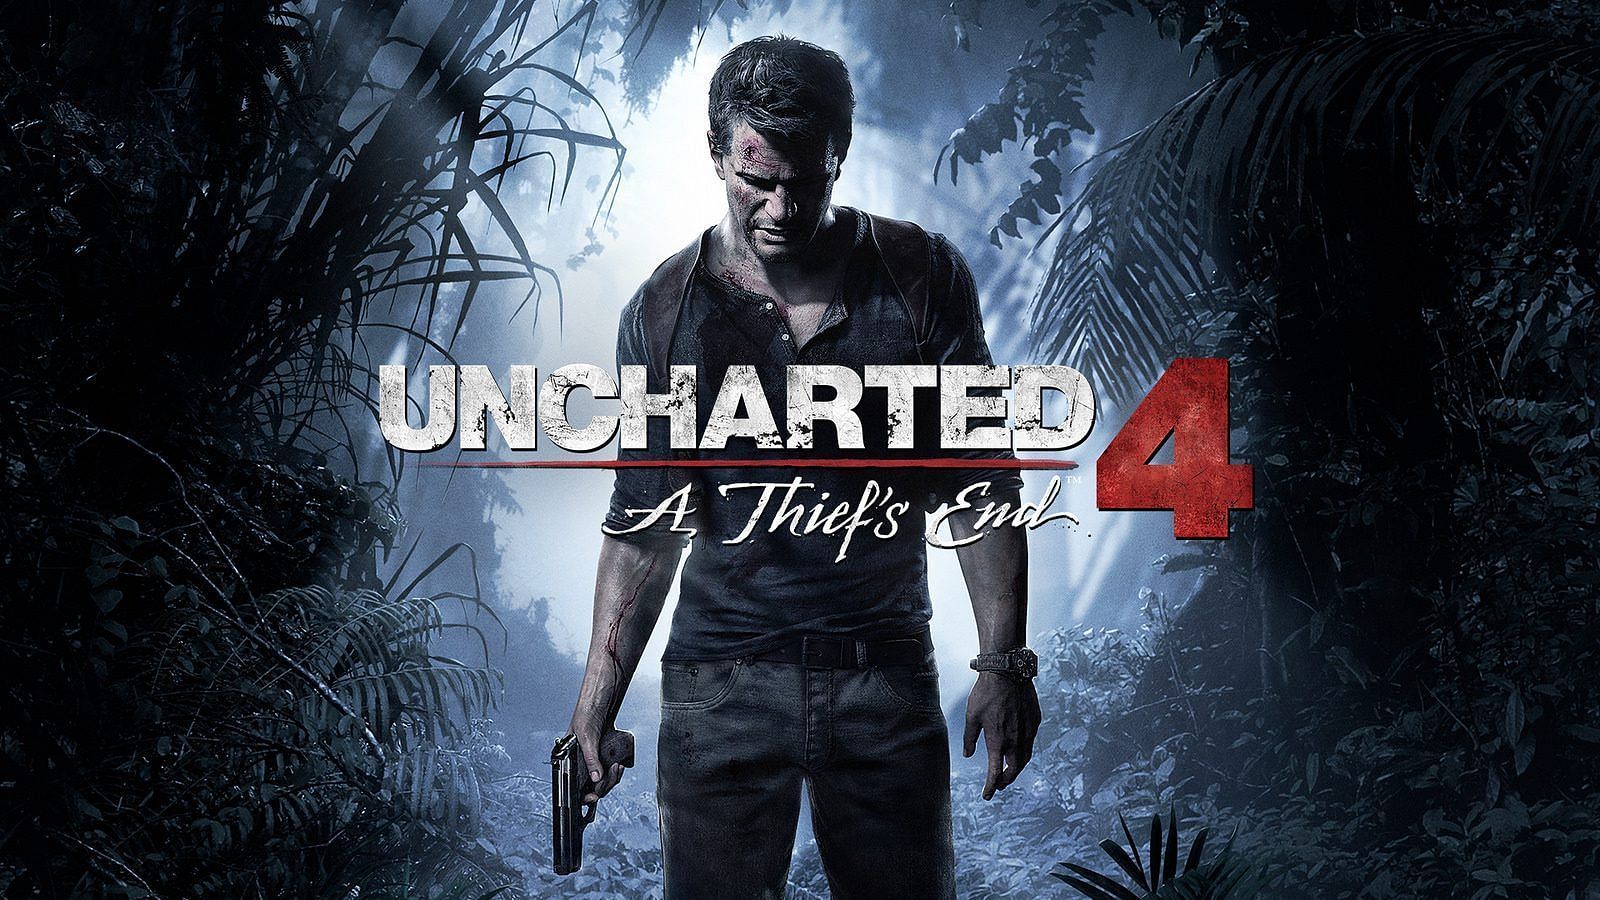 Uncharted 4:A Thief's End is one of the most played games on the PlayStation (Image via Naughty Dog)